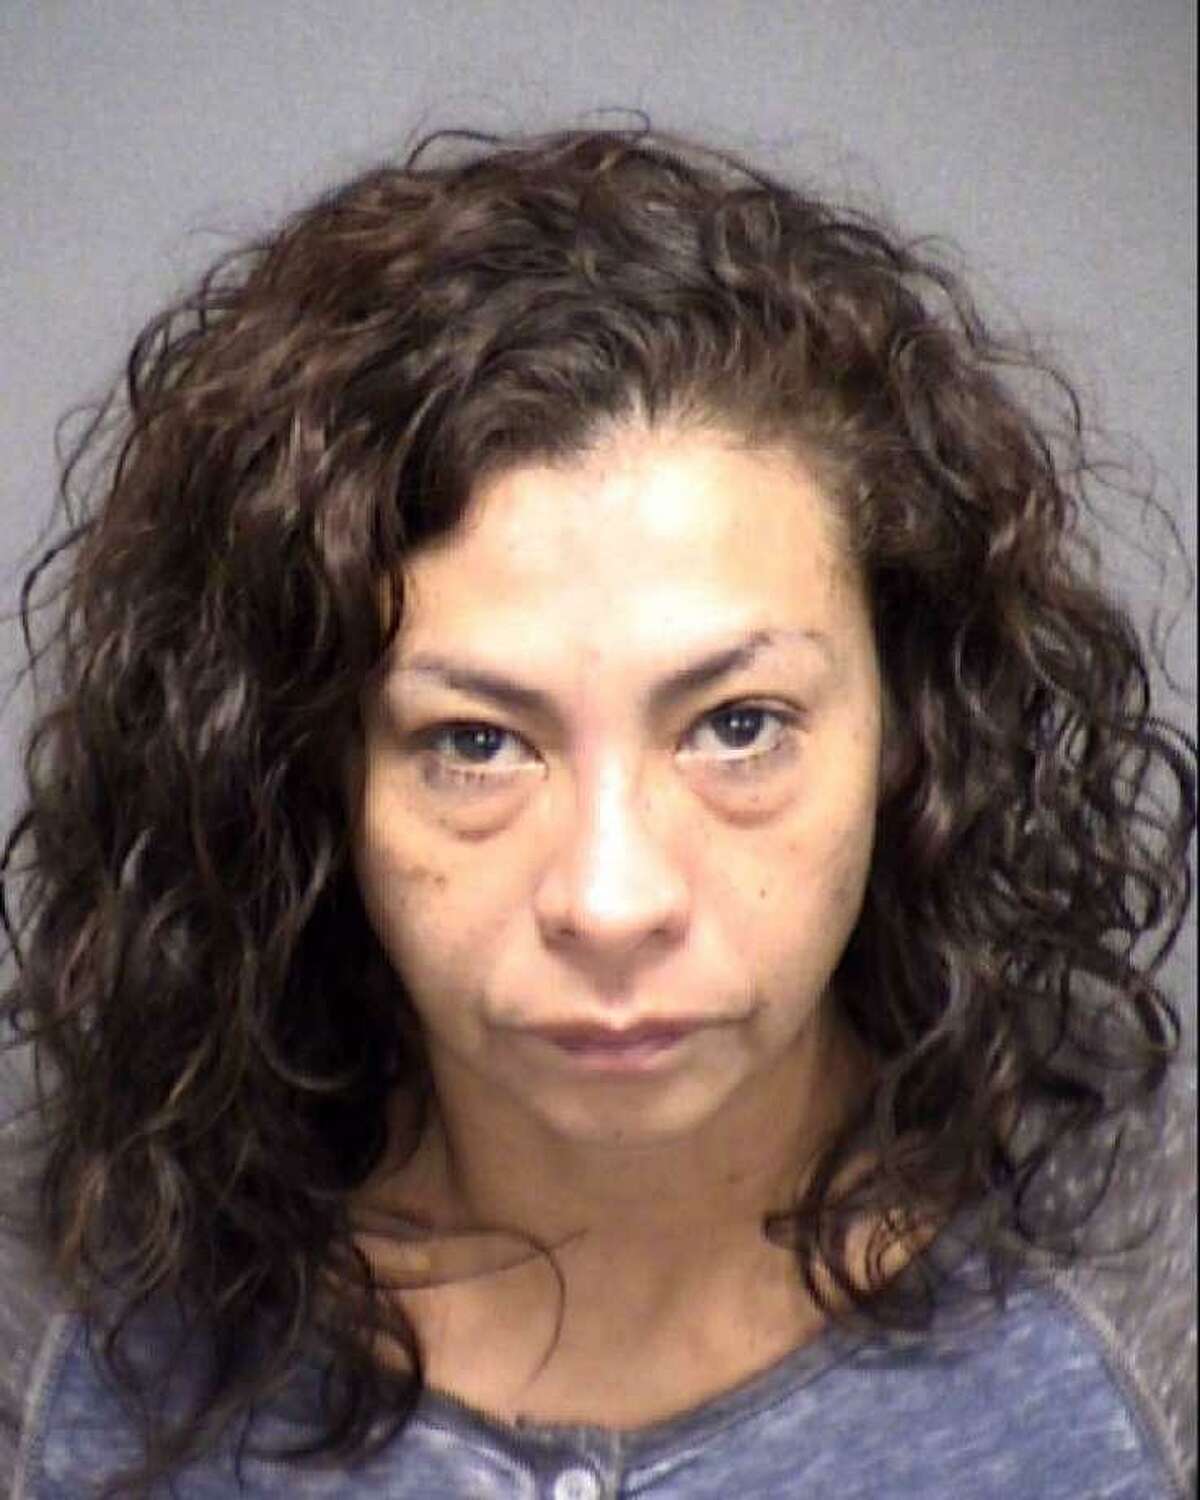 Angie Torres, 45, is being held on charges of tampering with evidence in relation to 8-month-old King Jay Davila's case.